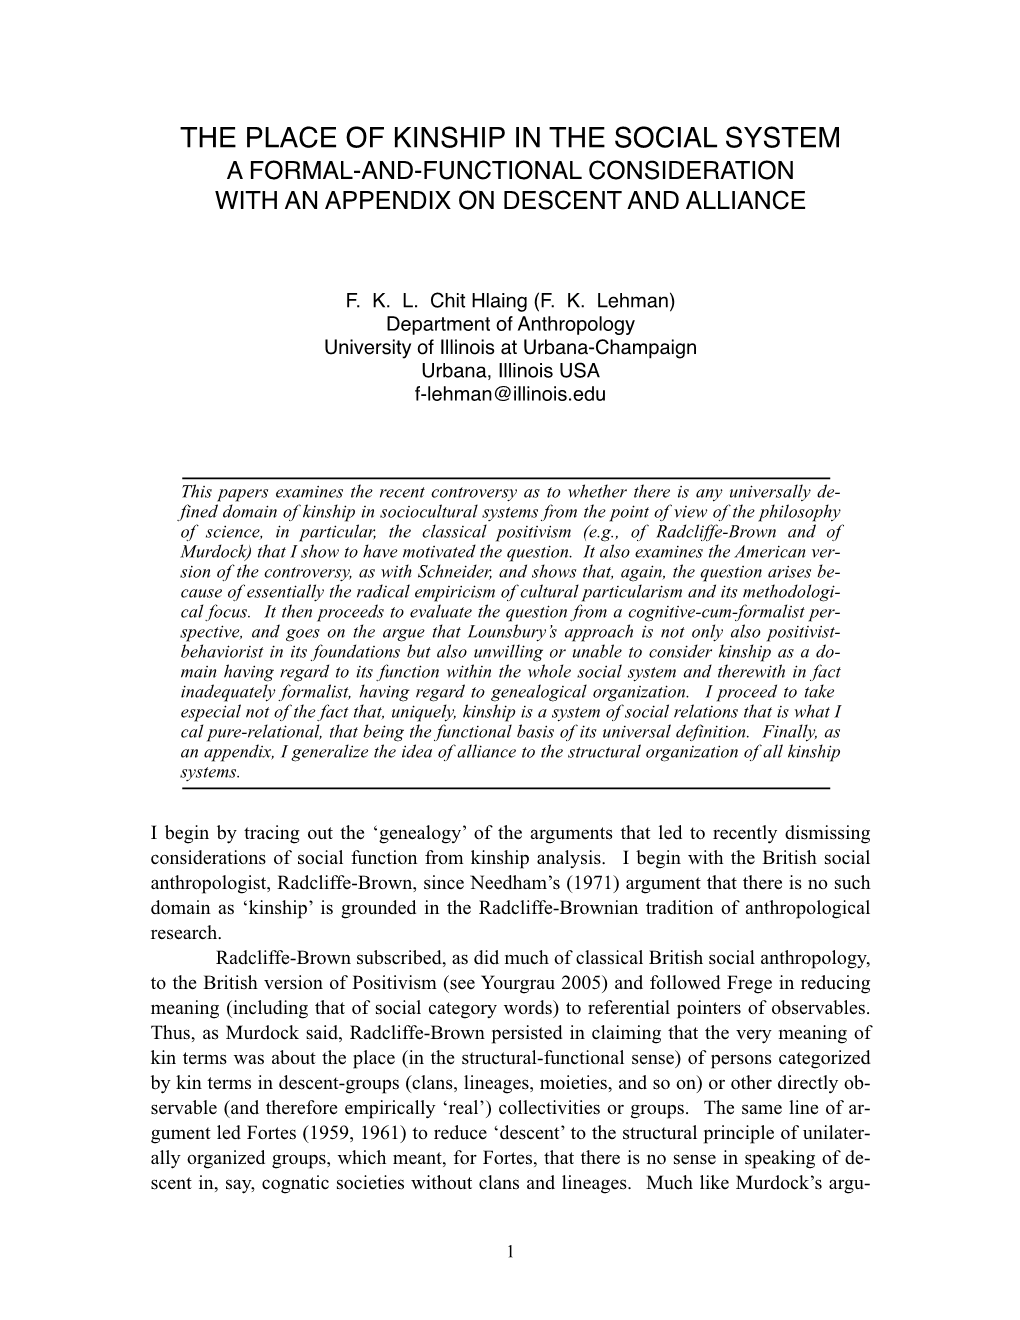 The Place of Kinship in the Social System a Formal-And-Functional Consideration with an Appendix on Descent and Alliance